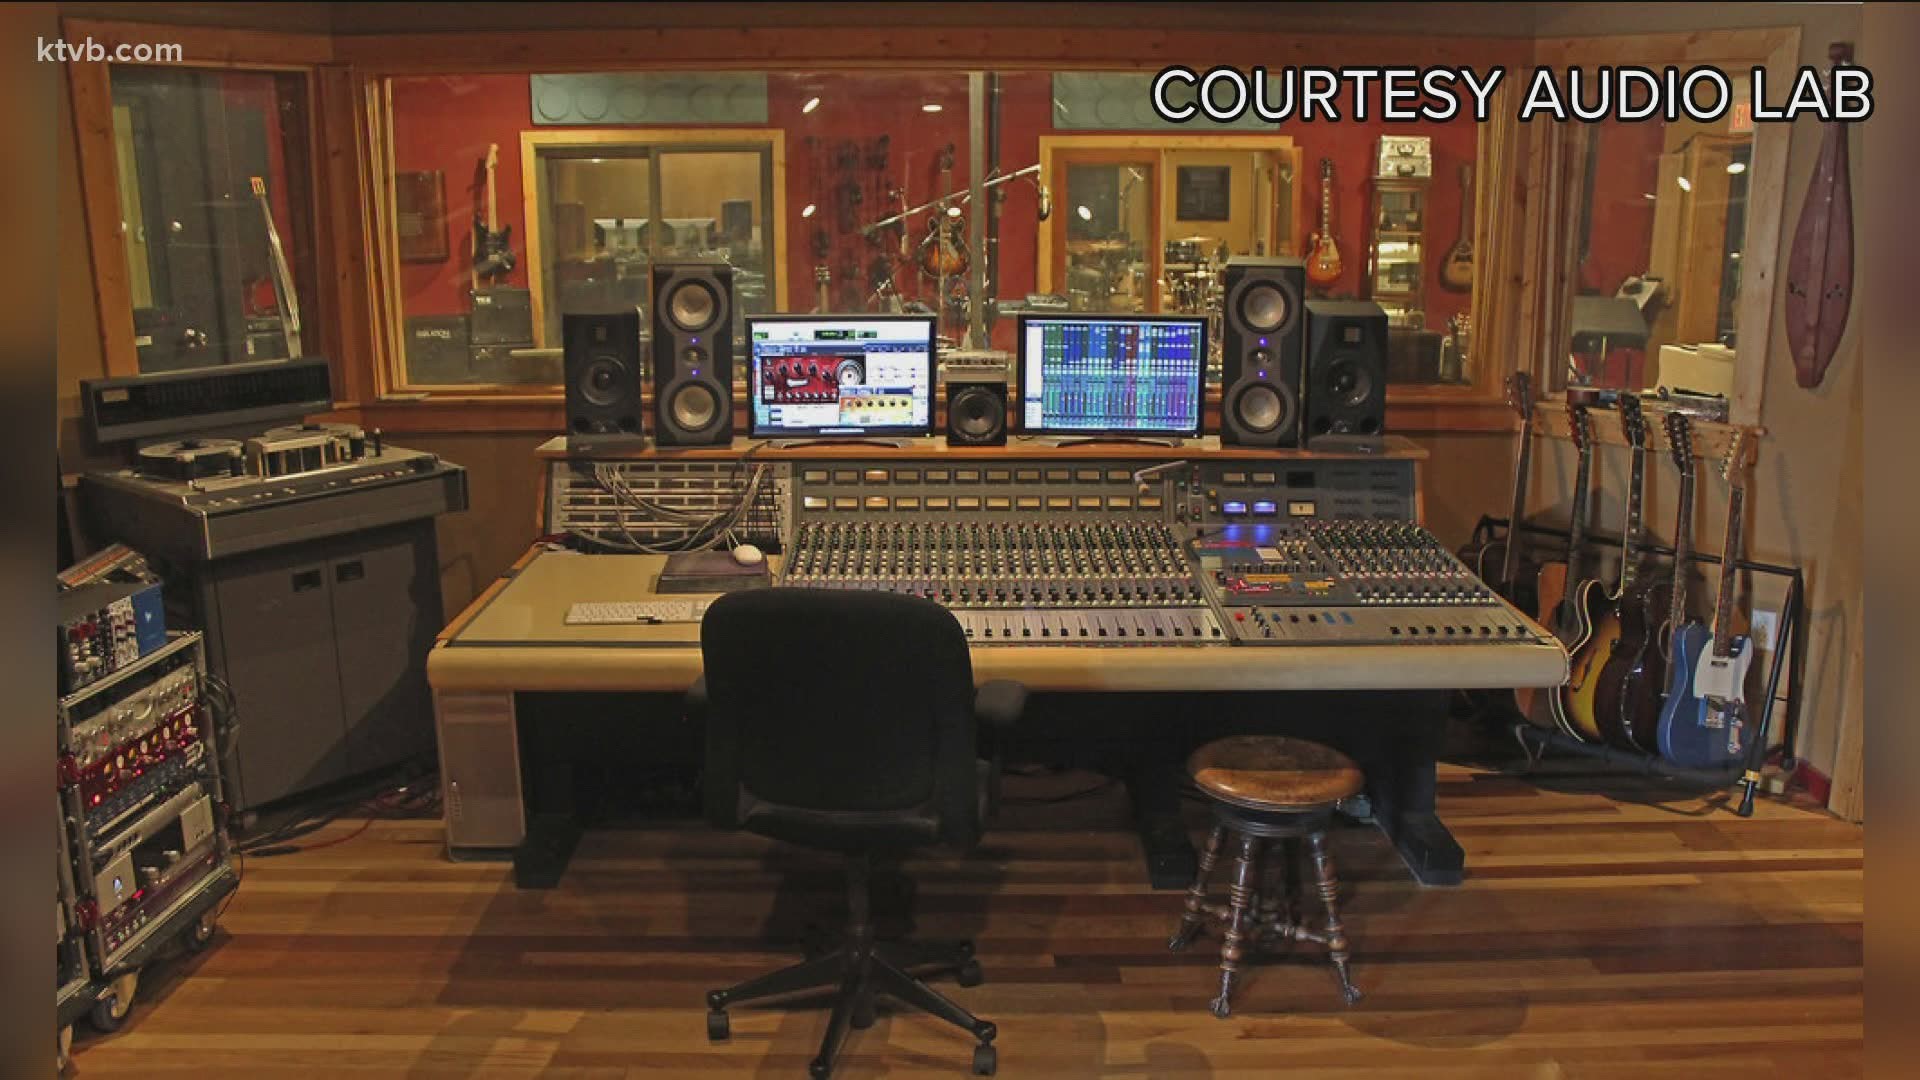 The Audio Lab has a lot of history in the community. It has been in business for 28 years and many well-known artists have recorded music there.